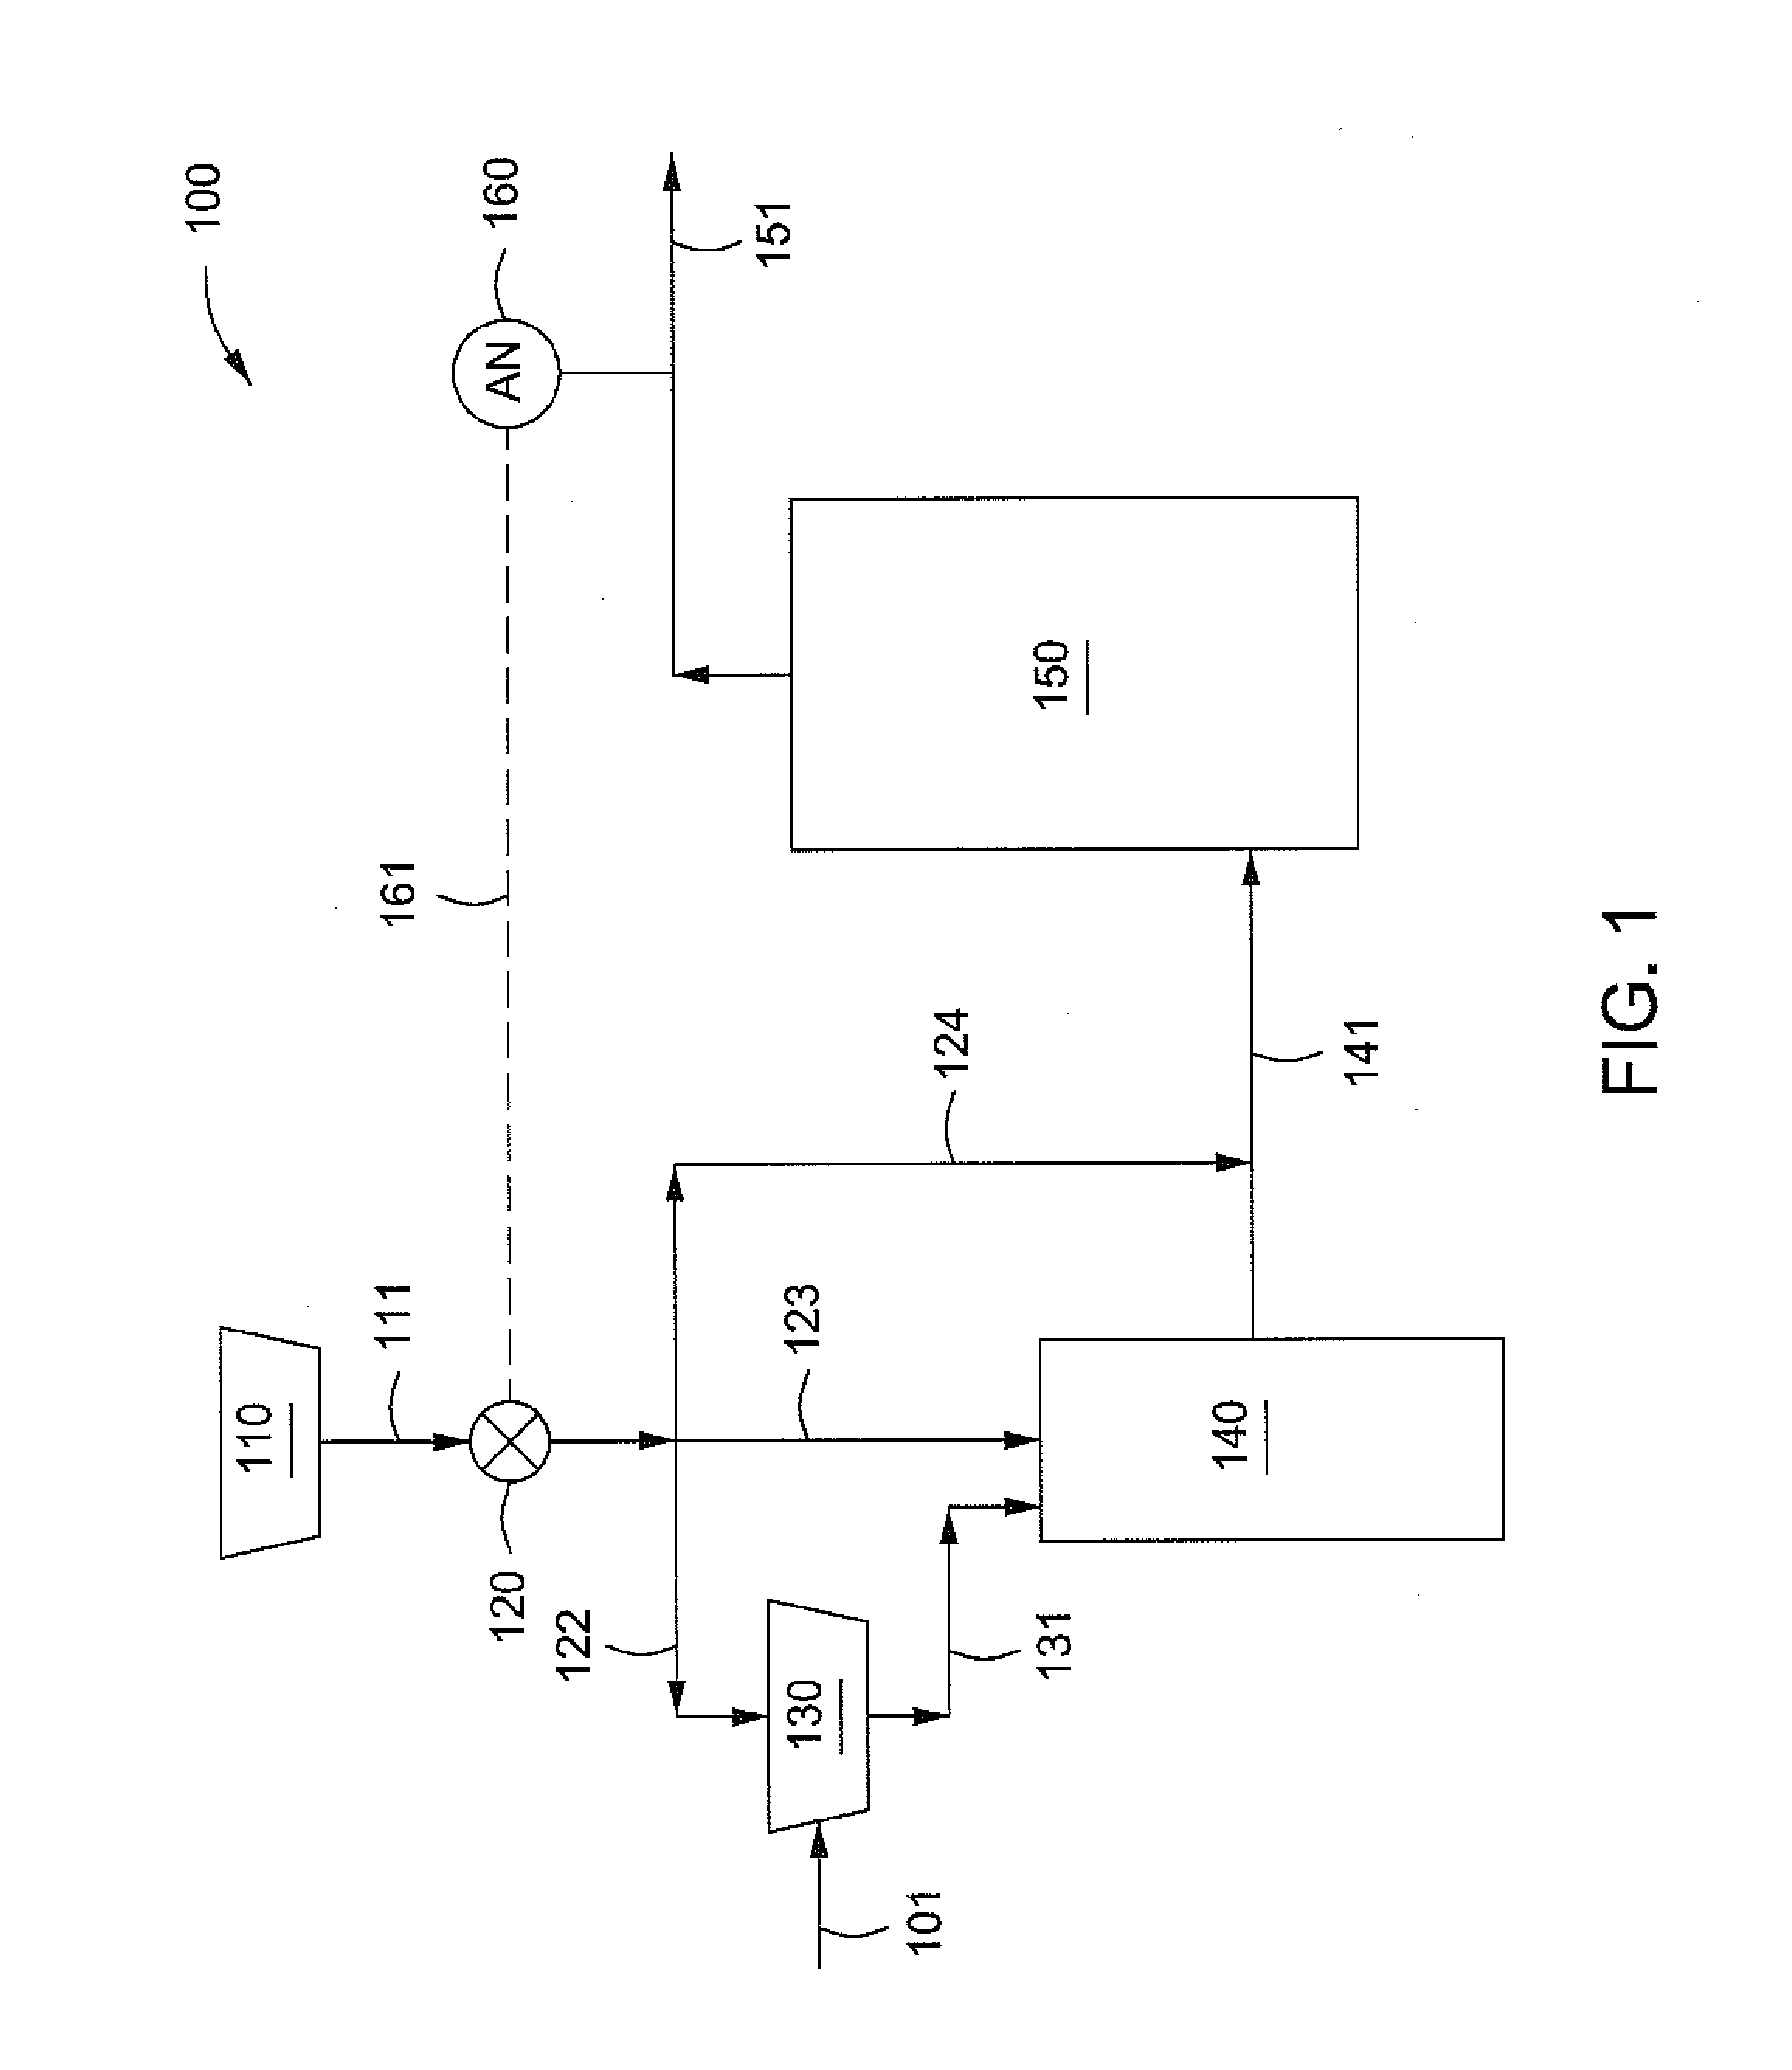 Systems and methods for maintaining sulfur concentration in a syngas to reduce metal dusting in downstream components